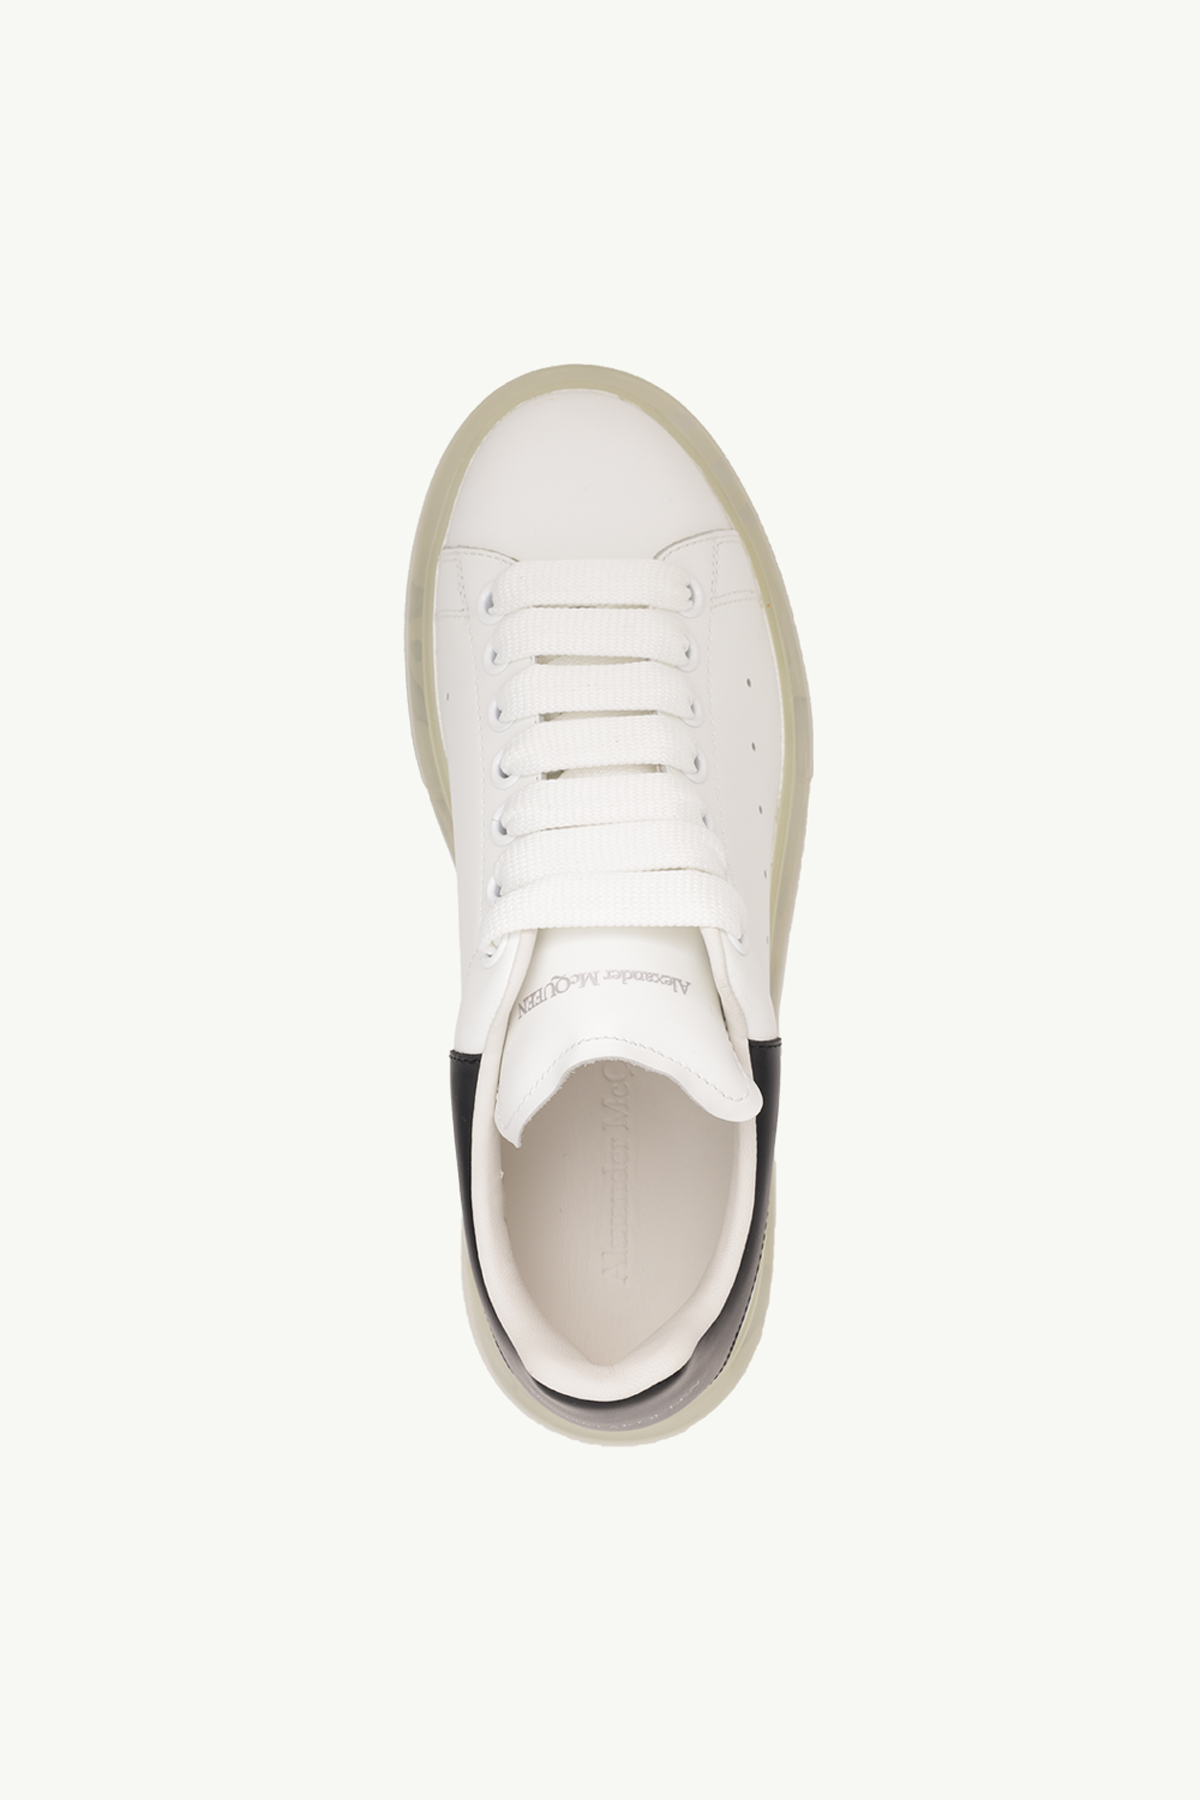 ALEXANDER MCQUEEN Women Transparent Oversized Lace-up Sneakers in White/Black Smooth Leather 3